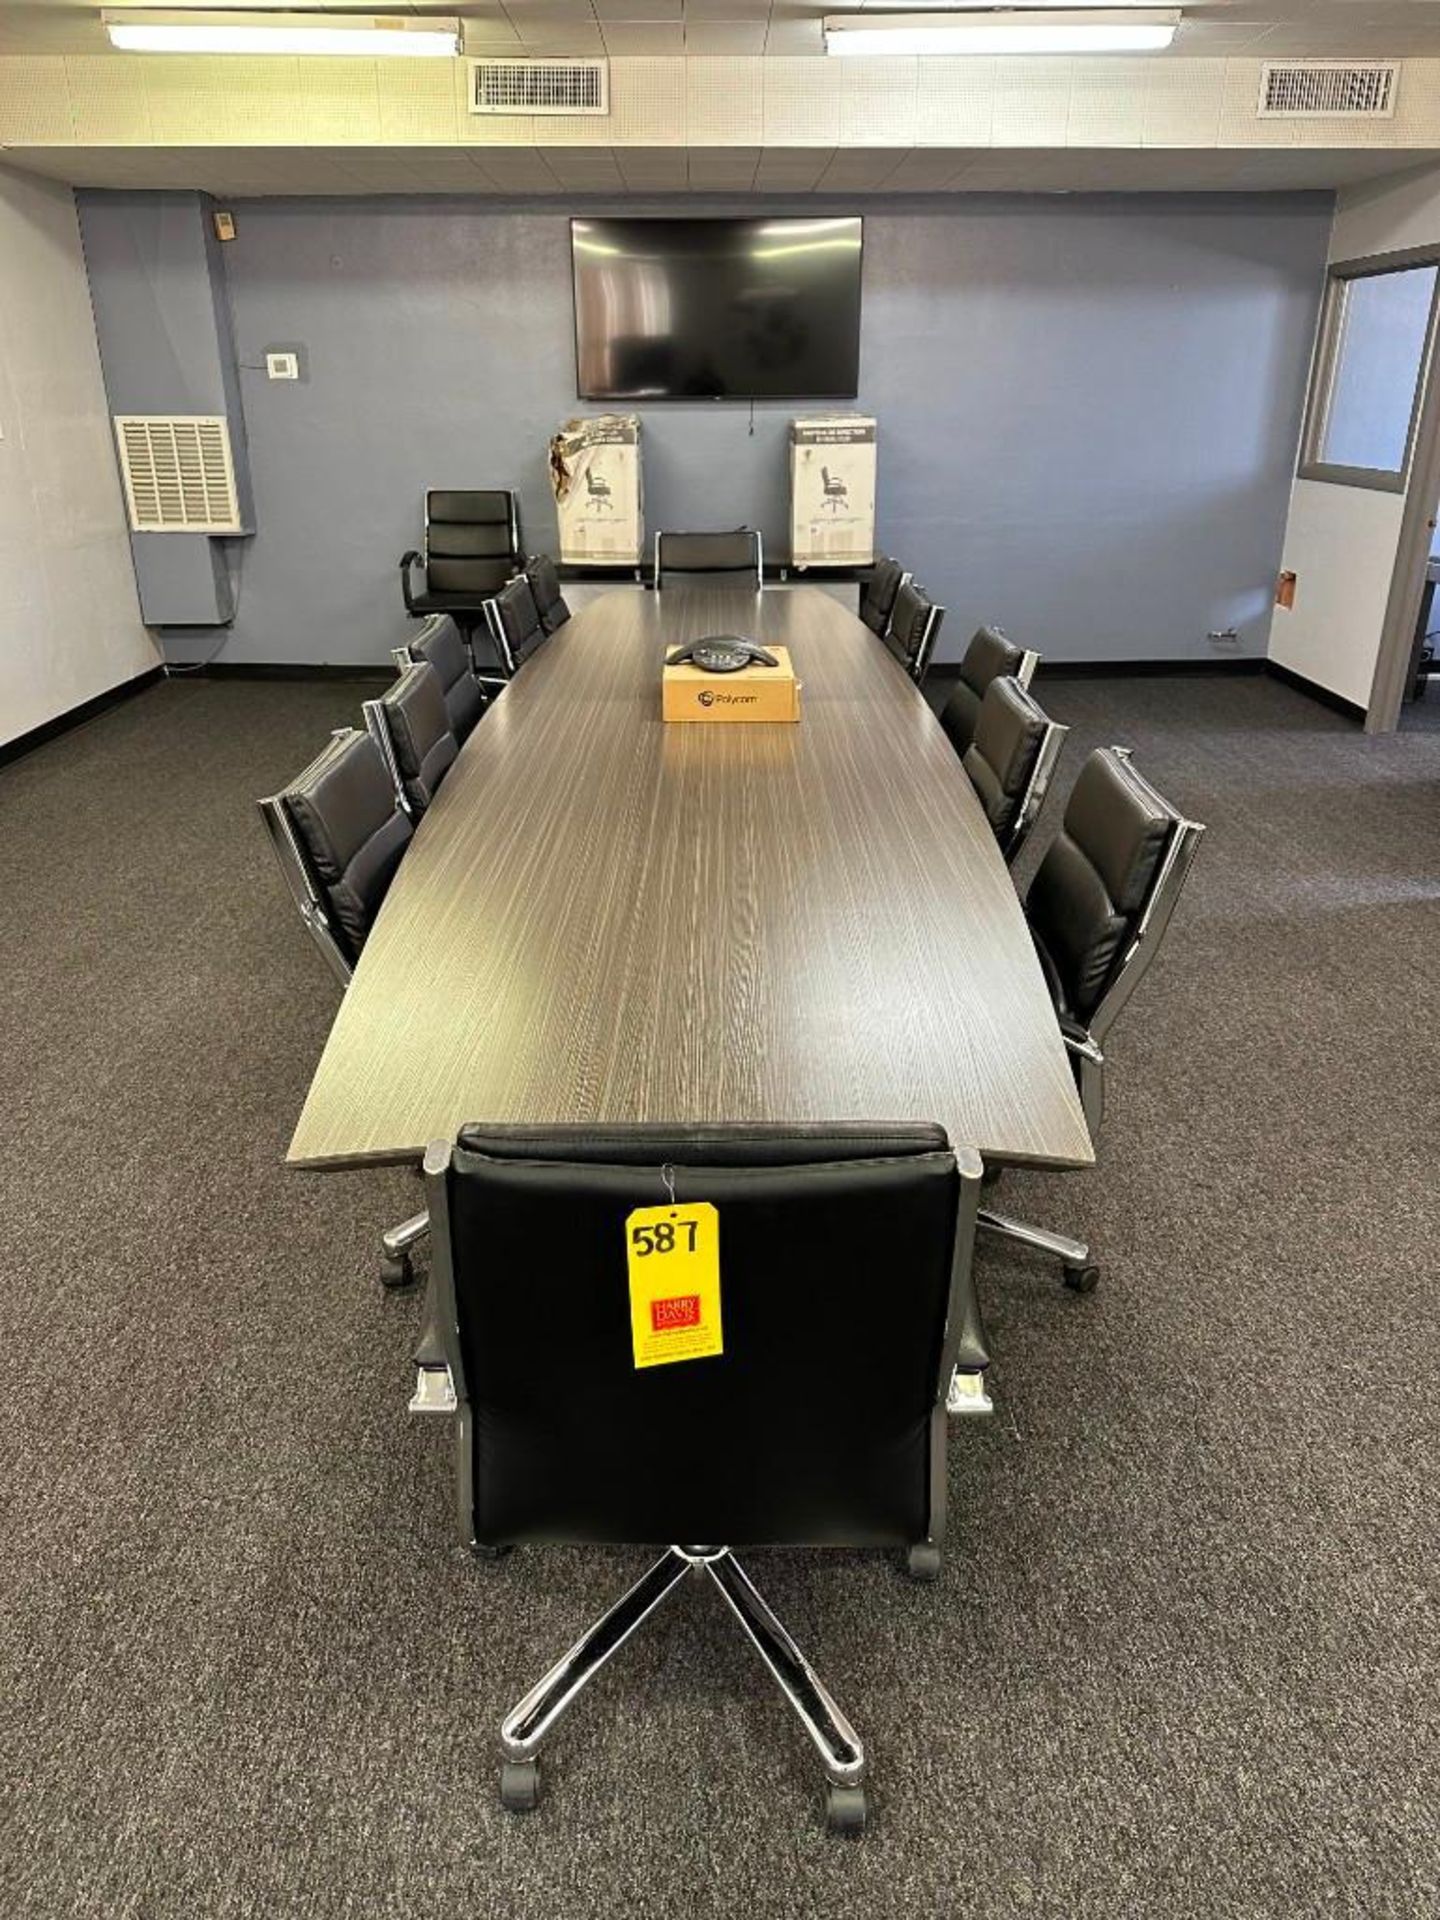 Conference Table, (15) Chairs, Samsung TV, Table, Polycom Conference Phone and Dry Erase Board